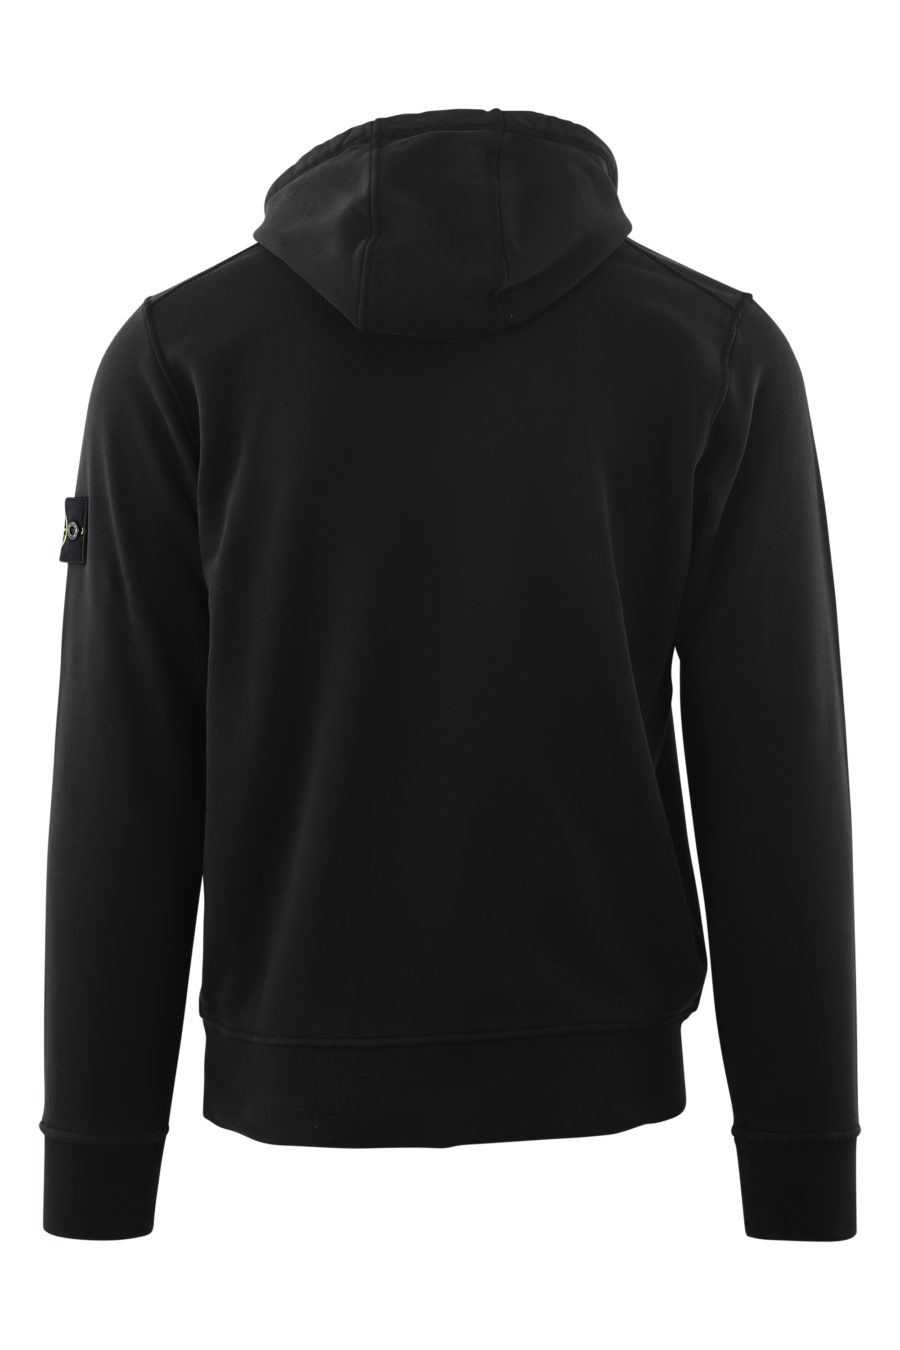 Black sweatshirt with hood and side patch - IMG 6598